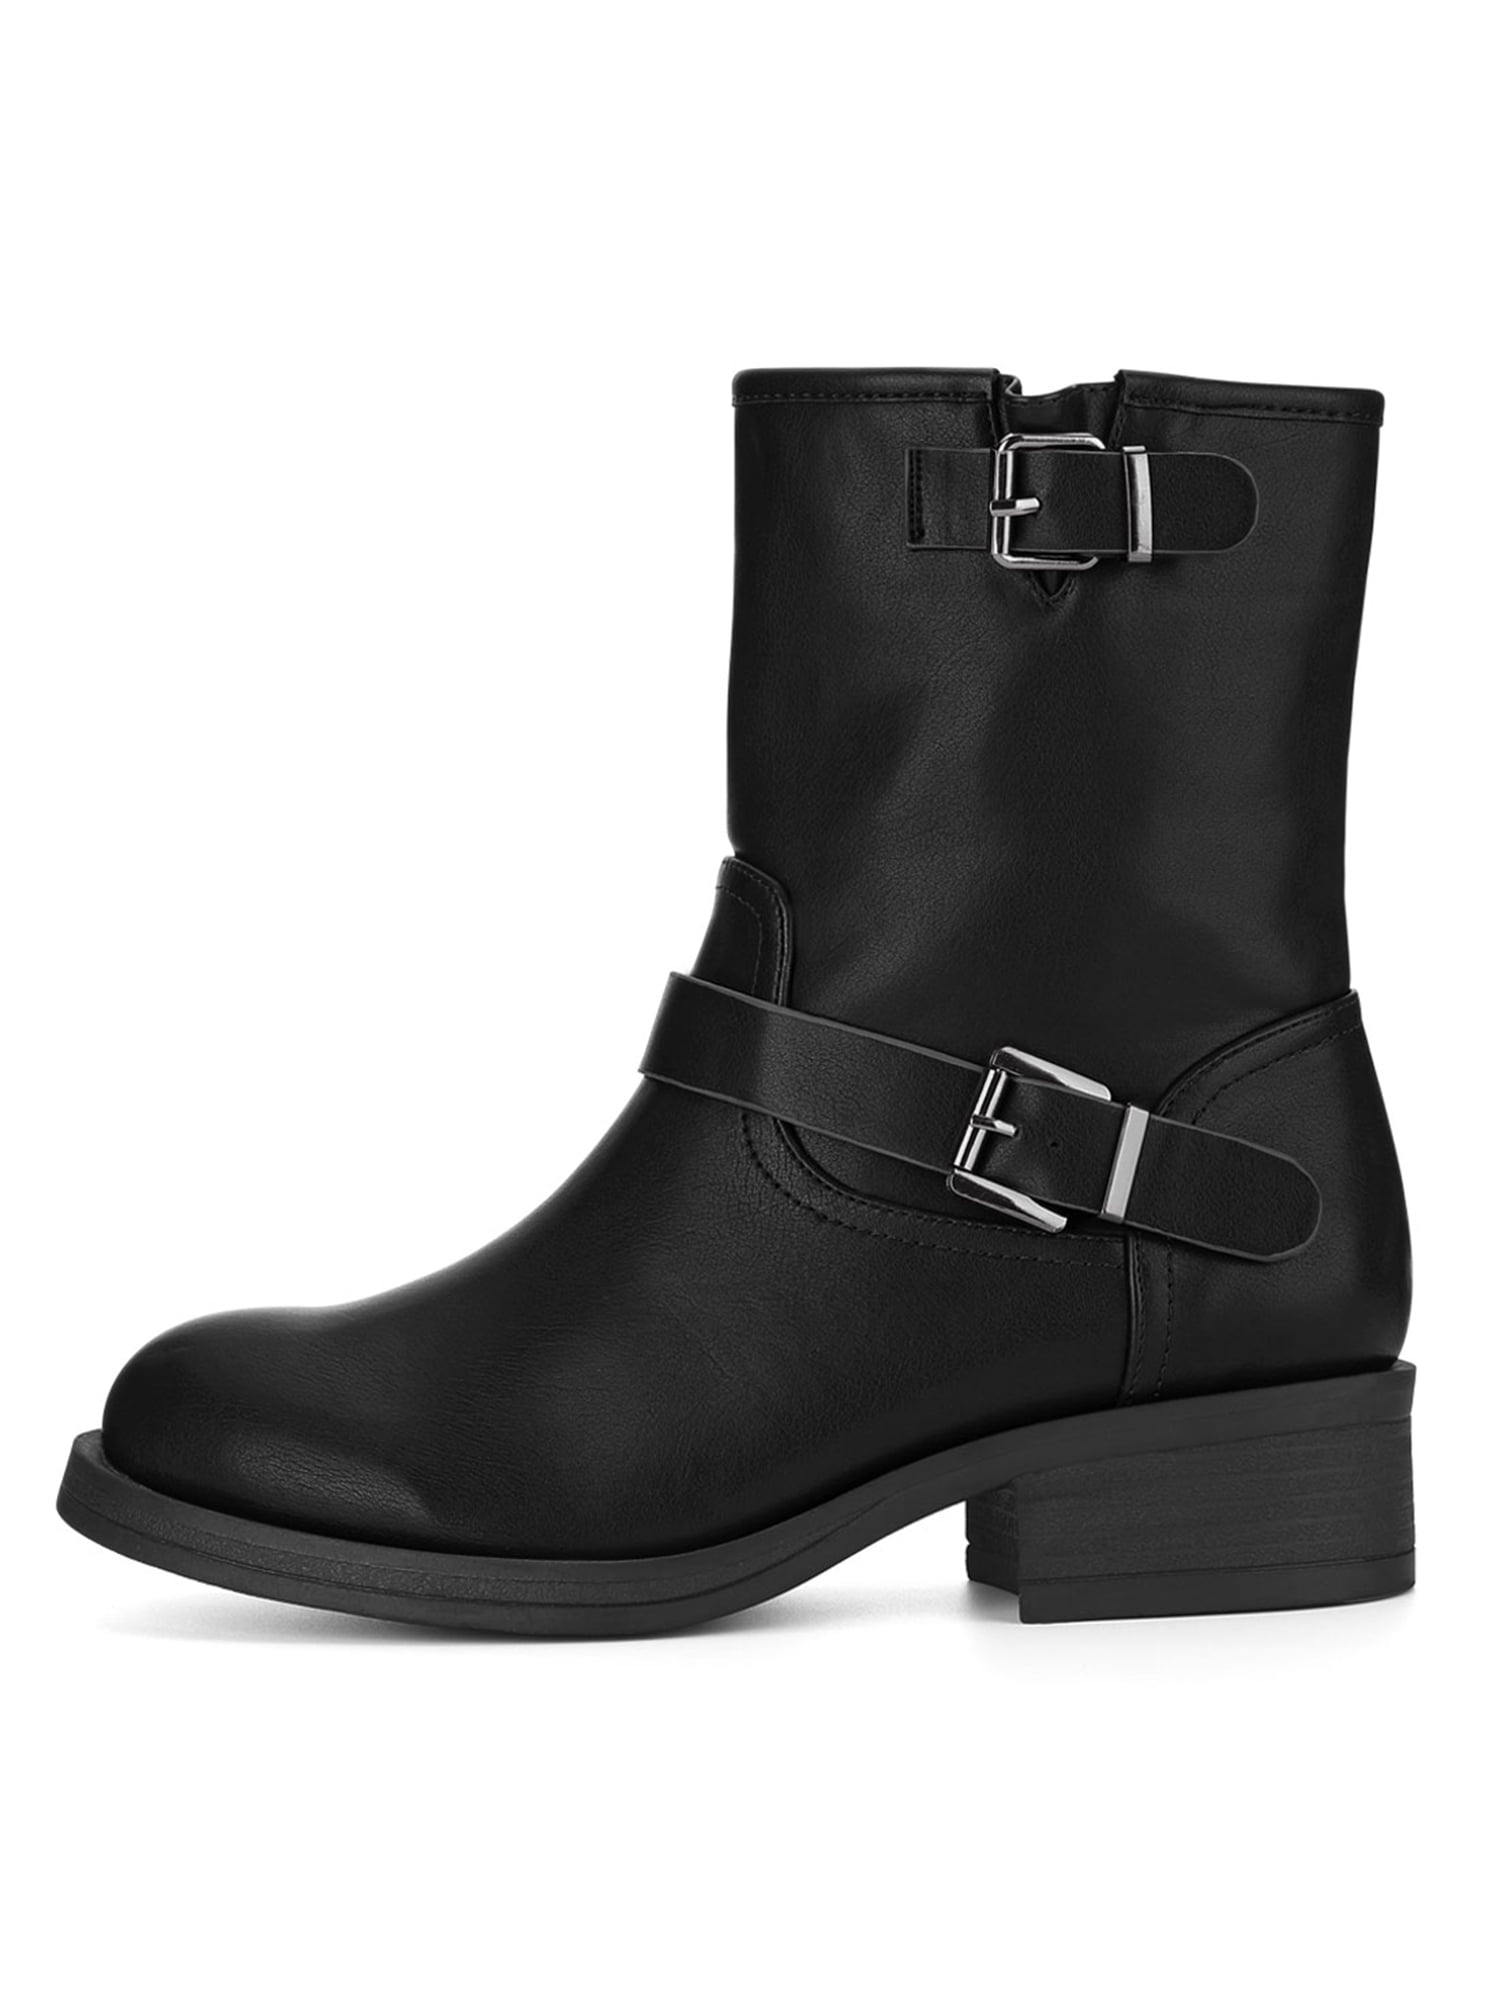 Unique Bargain Women's Low Chunky Heel Round Toe Buckle Strap Boots ...